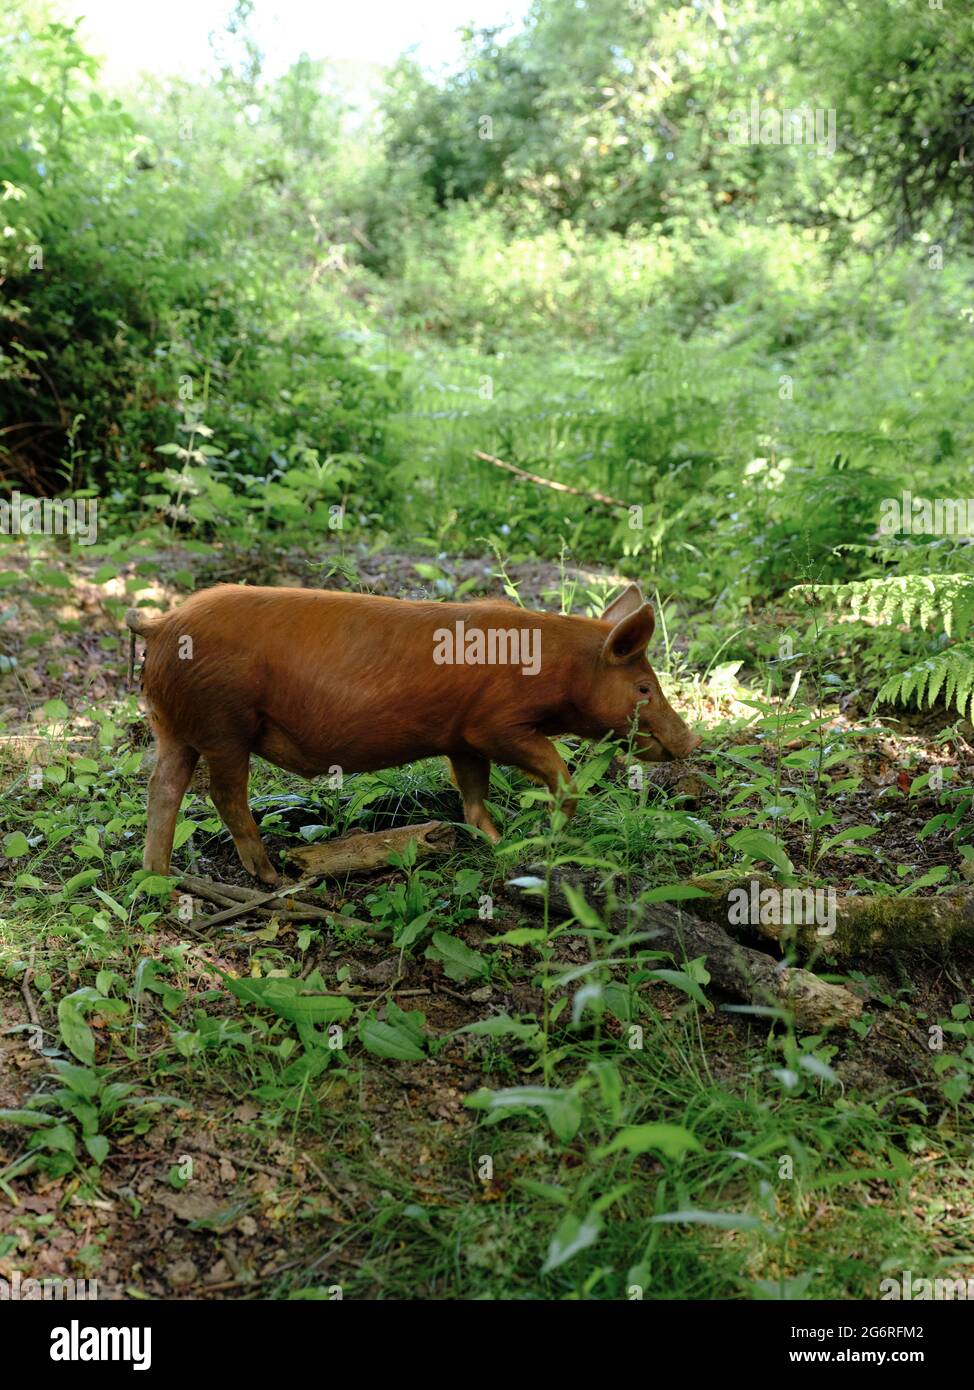 A free range pig in undergrowth used to naturally manage the low intensity rewilding landscape of the Knepp Estate in West Sussex England UK 2021 Stock Photo